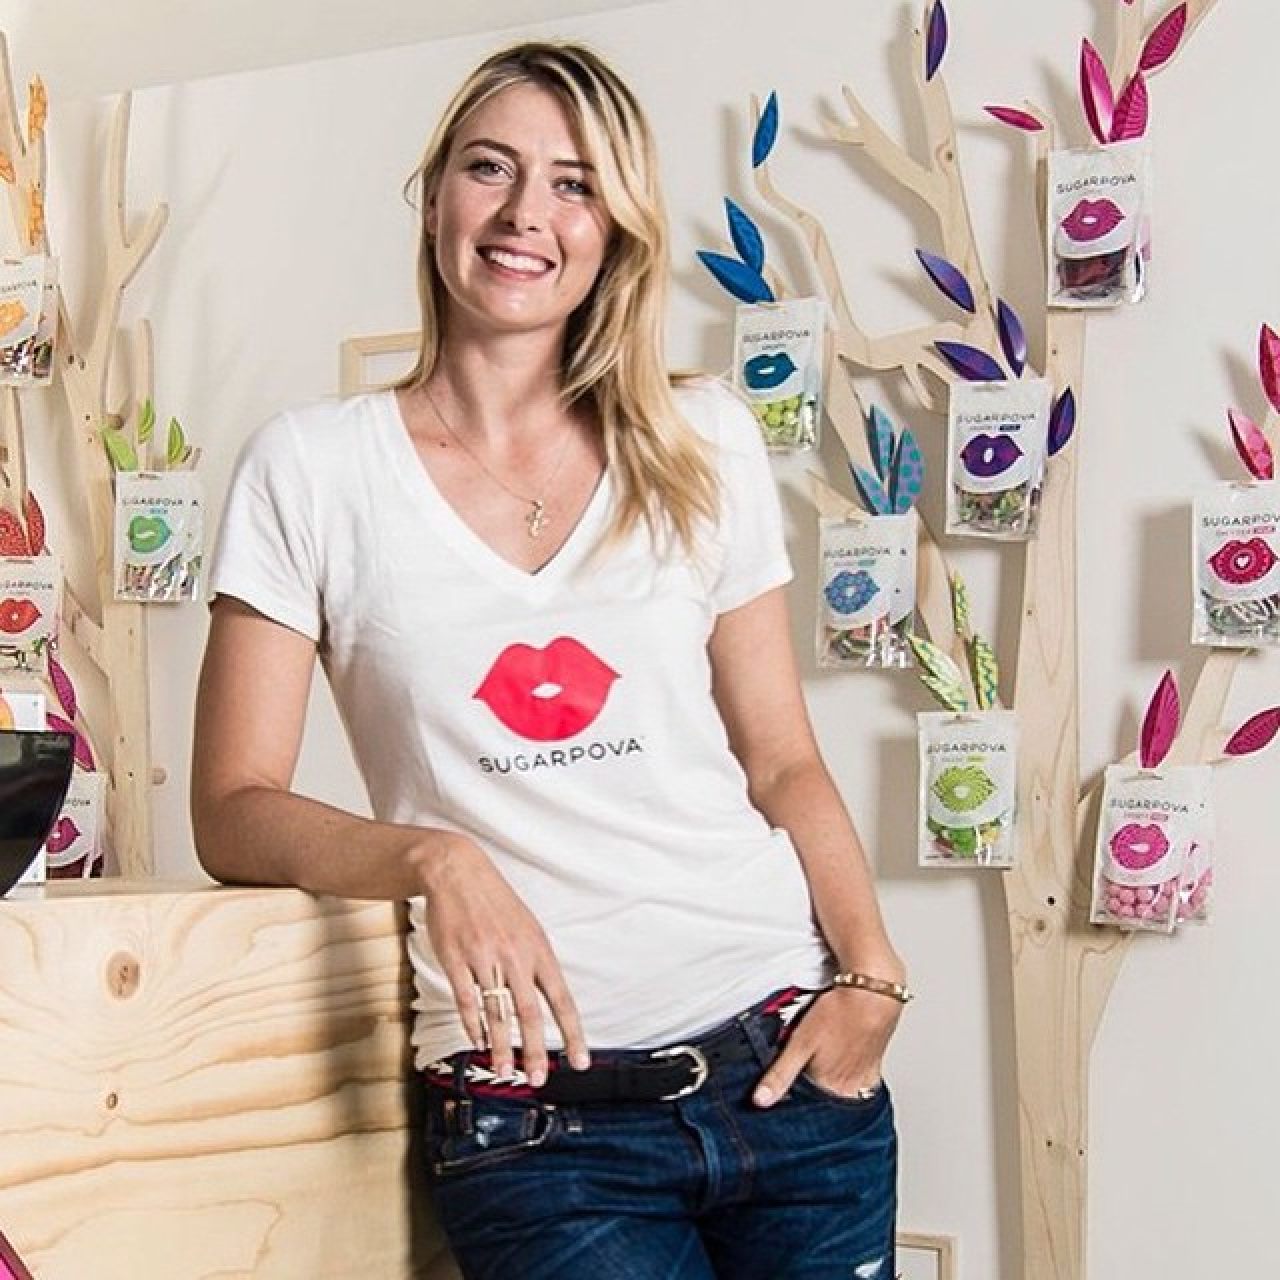 Maria Sharapova tested positive for a controlled drug that had previously been allowed – and lost several brand deals as a result. Photo: @sugarpova/Instagram